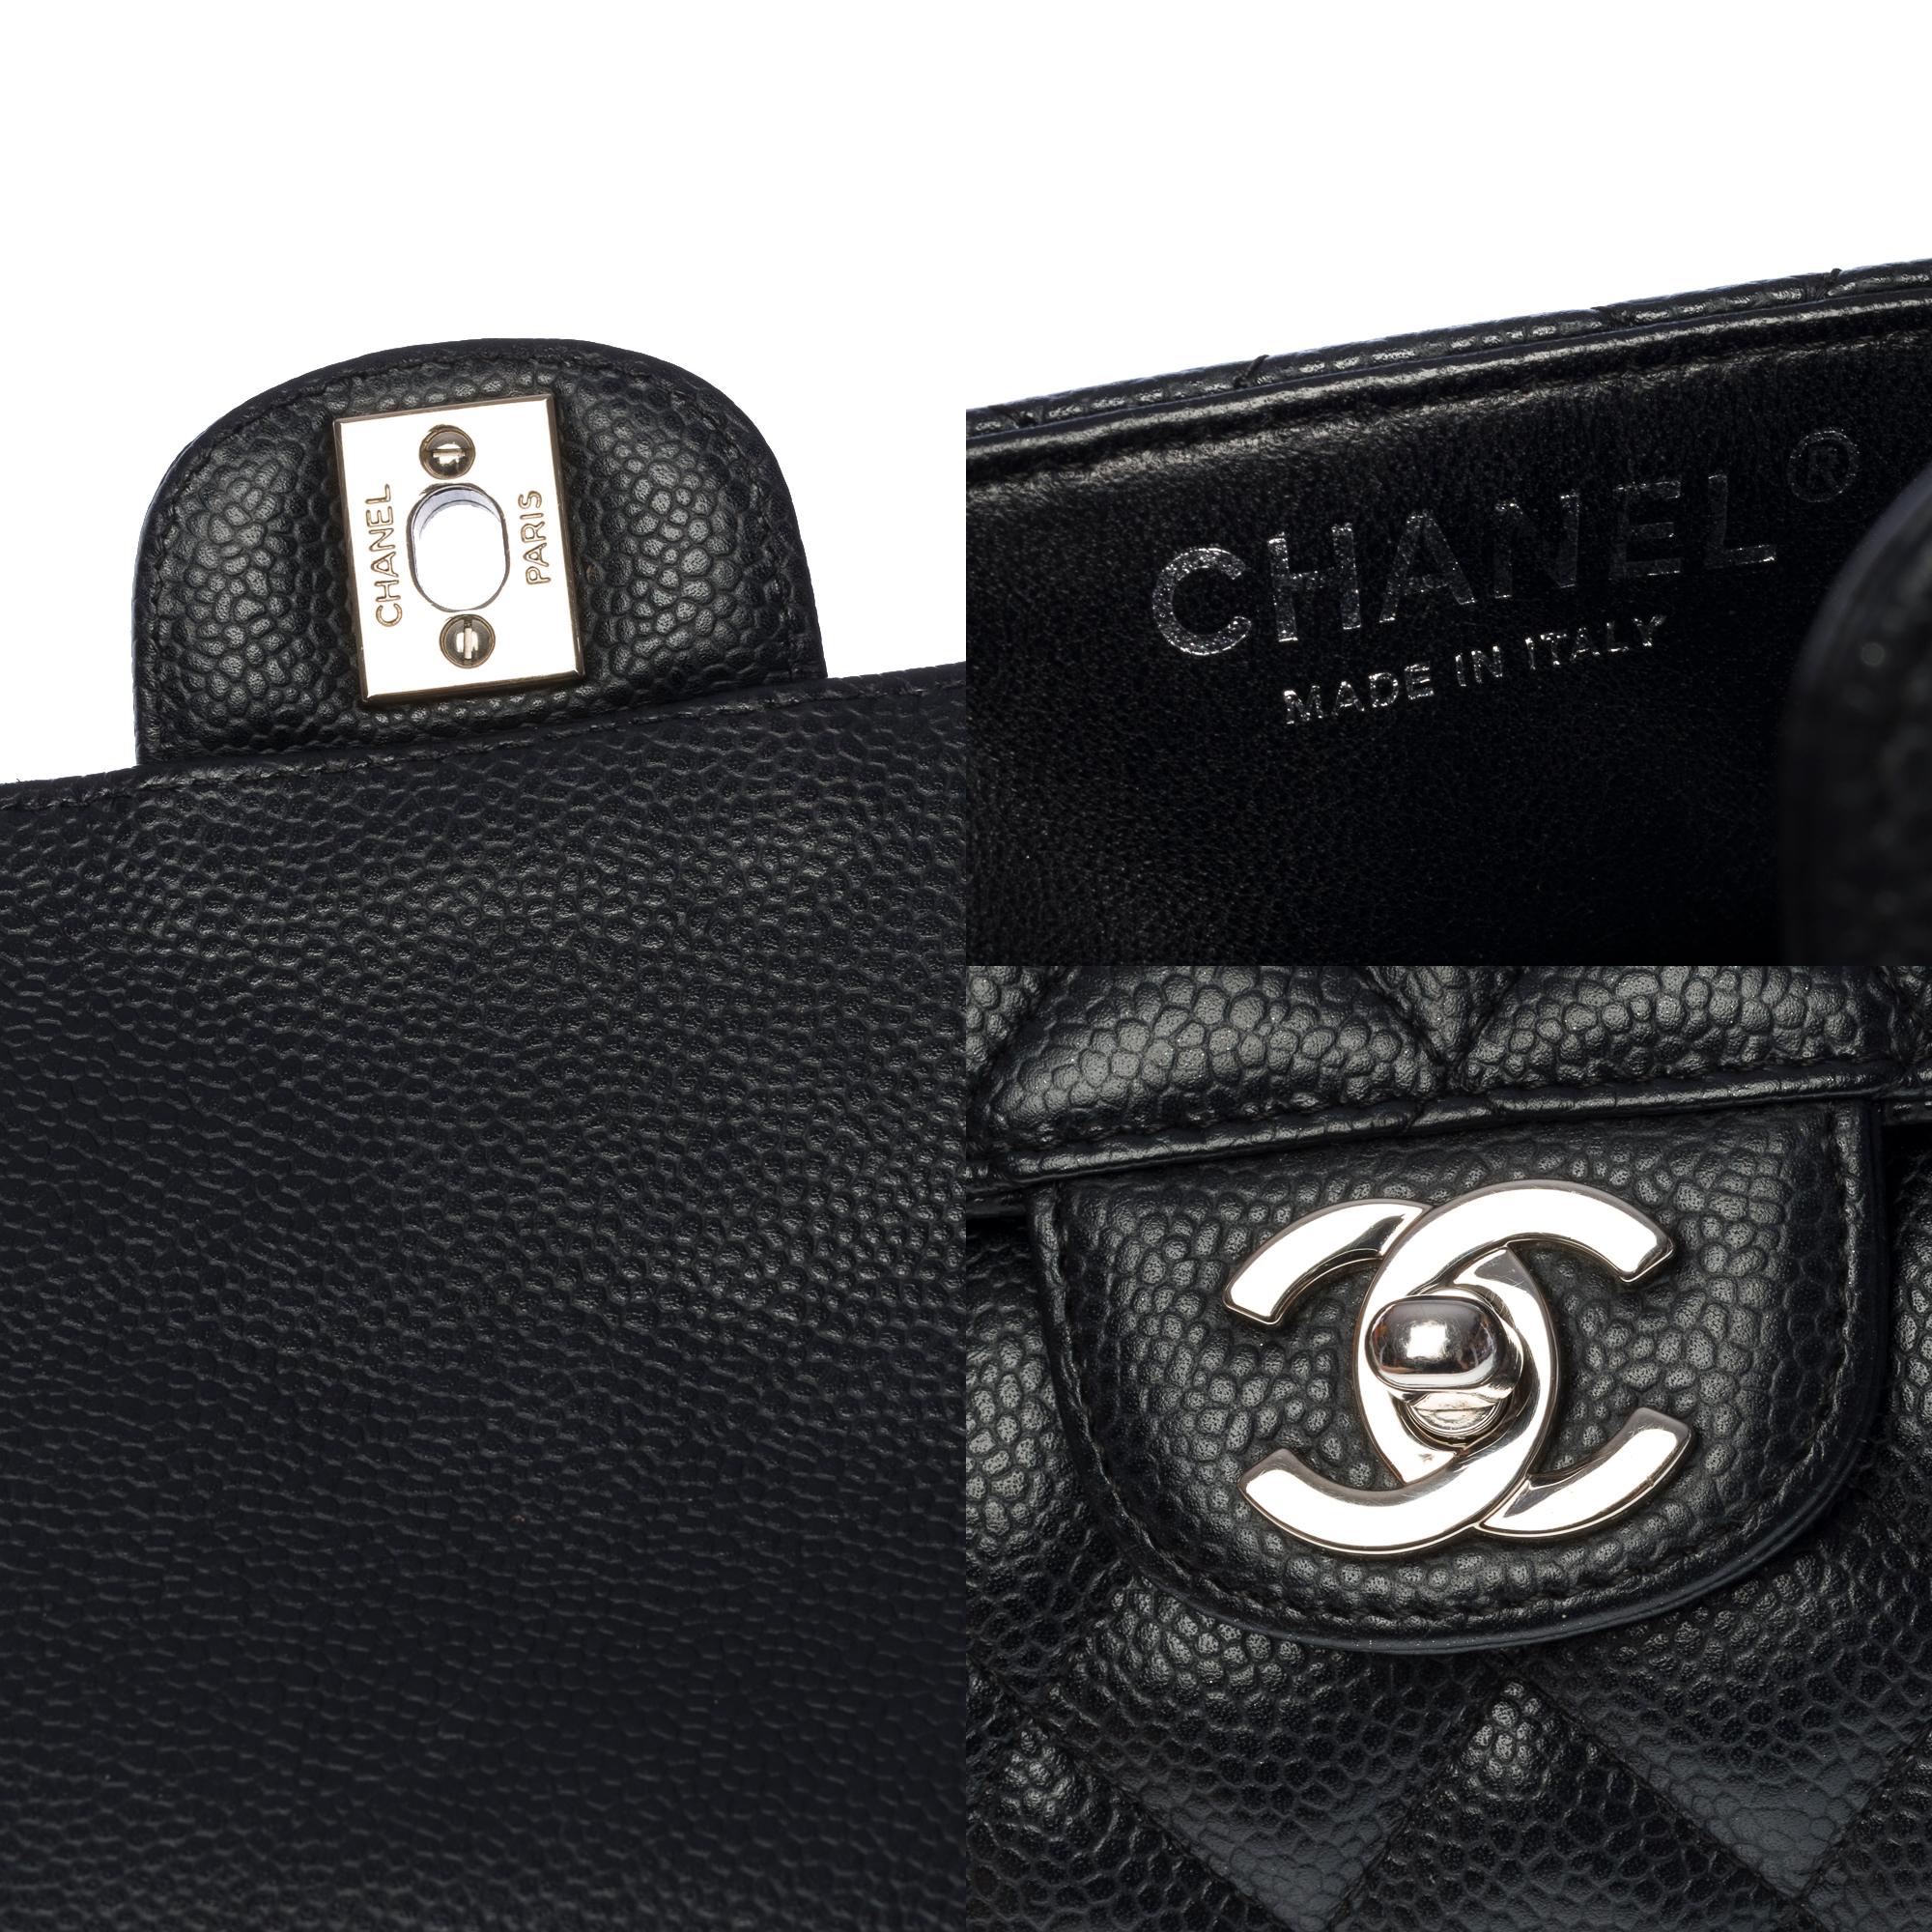 Chanel Classic Baguette shoulder bag in black caviar quilted leather , SHW 2